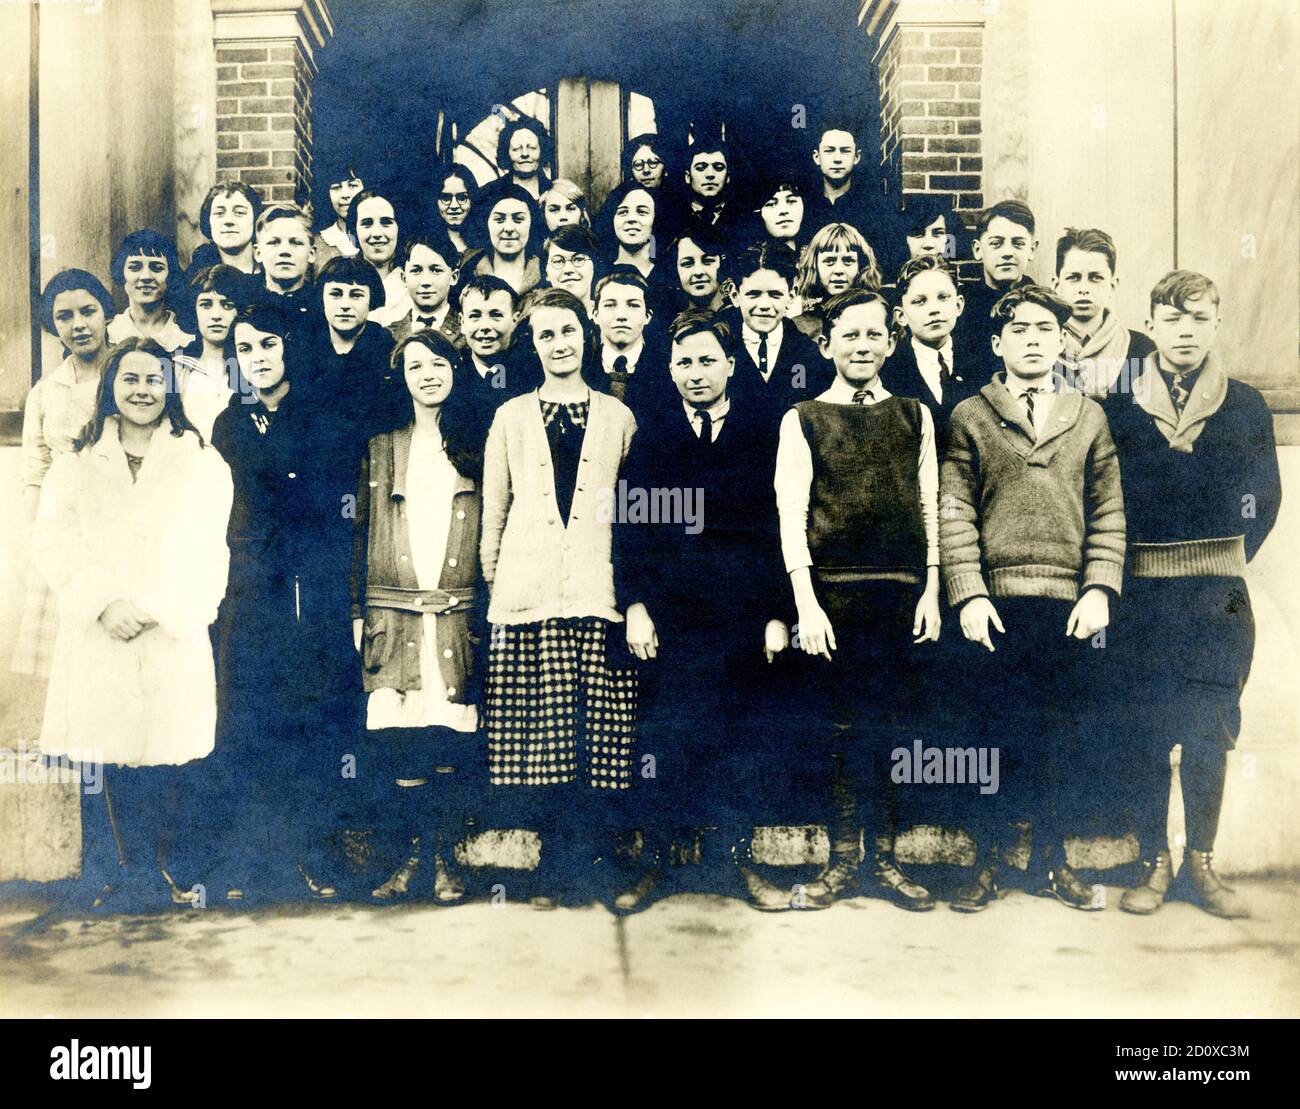 This photo dates to around 1922 and shows a class at Jireh Swift School in the North End of New Bedford, Massachusetts,at the end of the school year and graduating to the next class.  This elementary school was built in 1909 and named after Jireh Swift, a prominent merchant.  He was the founder of Swift & Allen, an organization that served the whaling industry as agents, ship chandlers, and commission merchants. Swift & Allen were major suppliers of cordage, iron ware, groceries, and other goods needed to outfit whaling vessels of New Bedford and nearby ports. Stock Photo